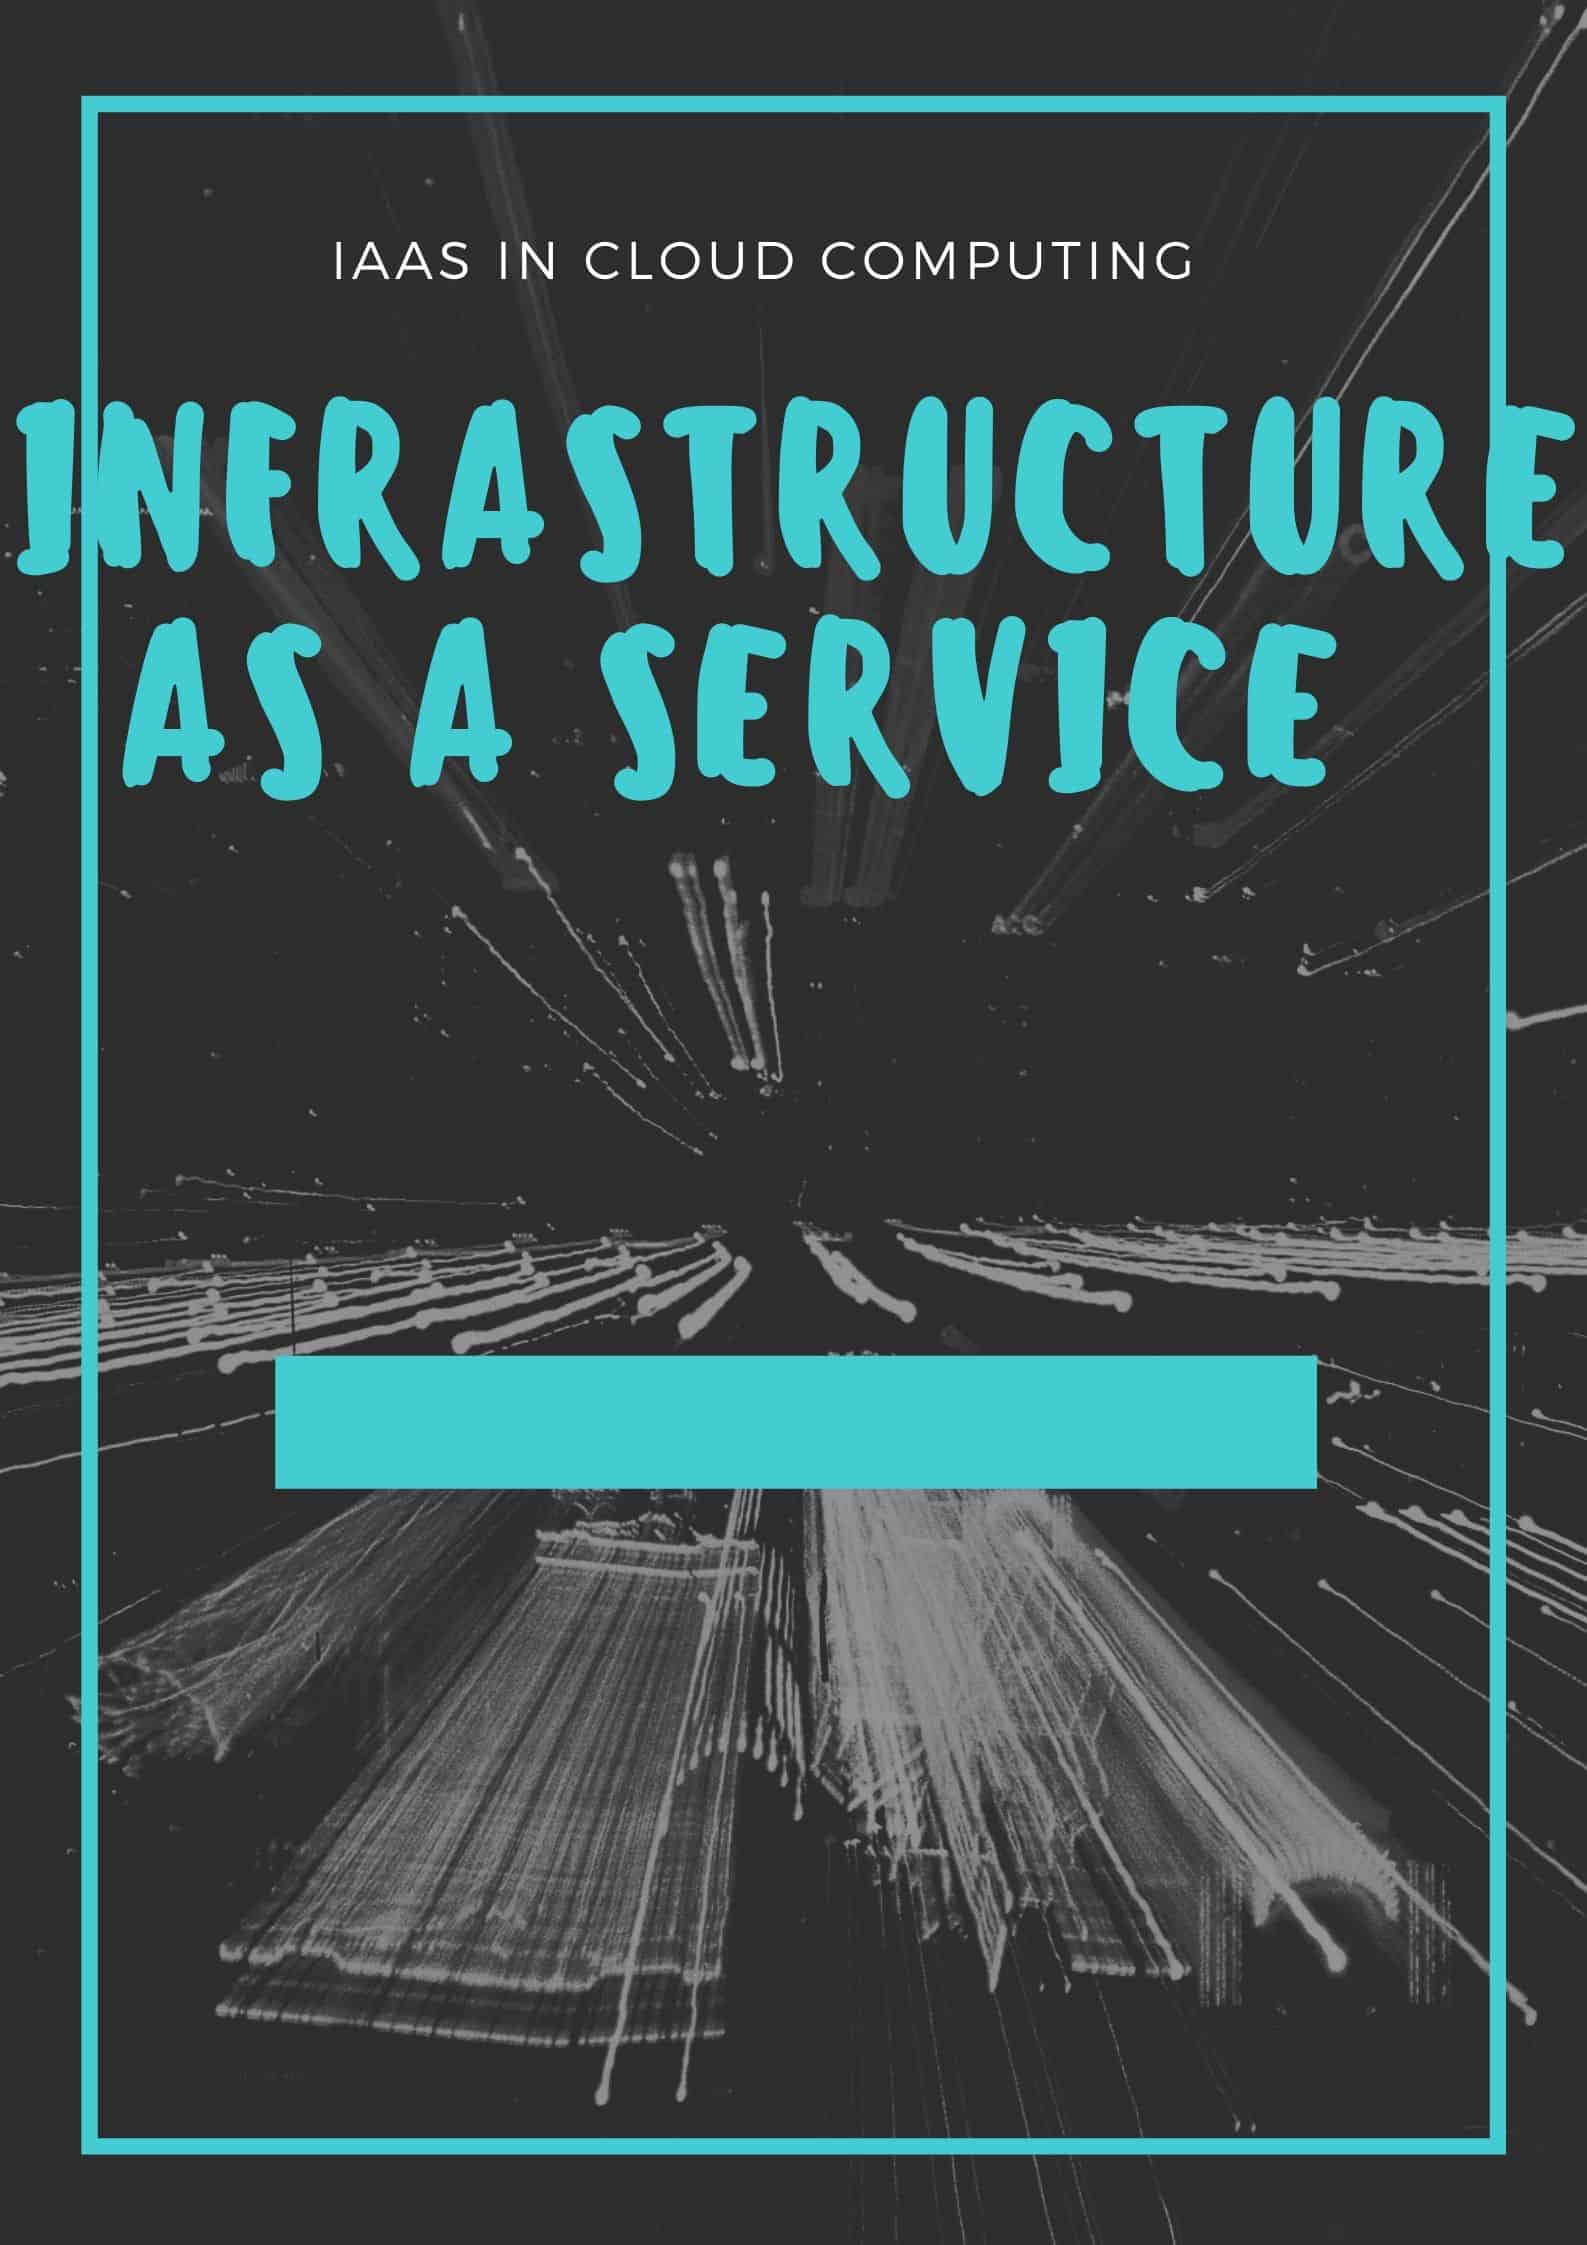 What is Infrastructure as a Service | IaaS in Cloud Computing